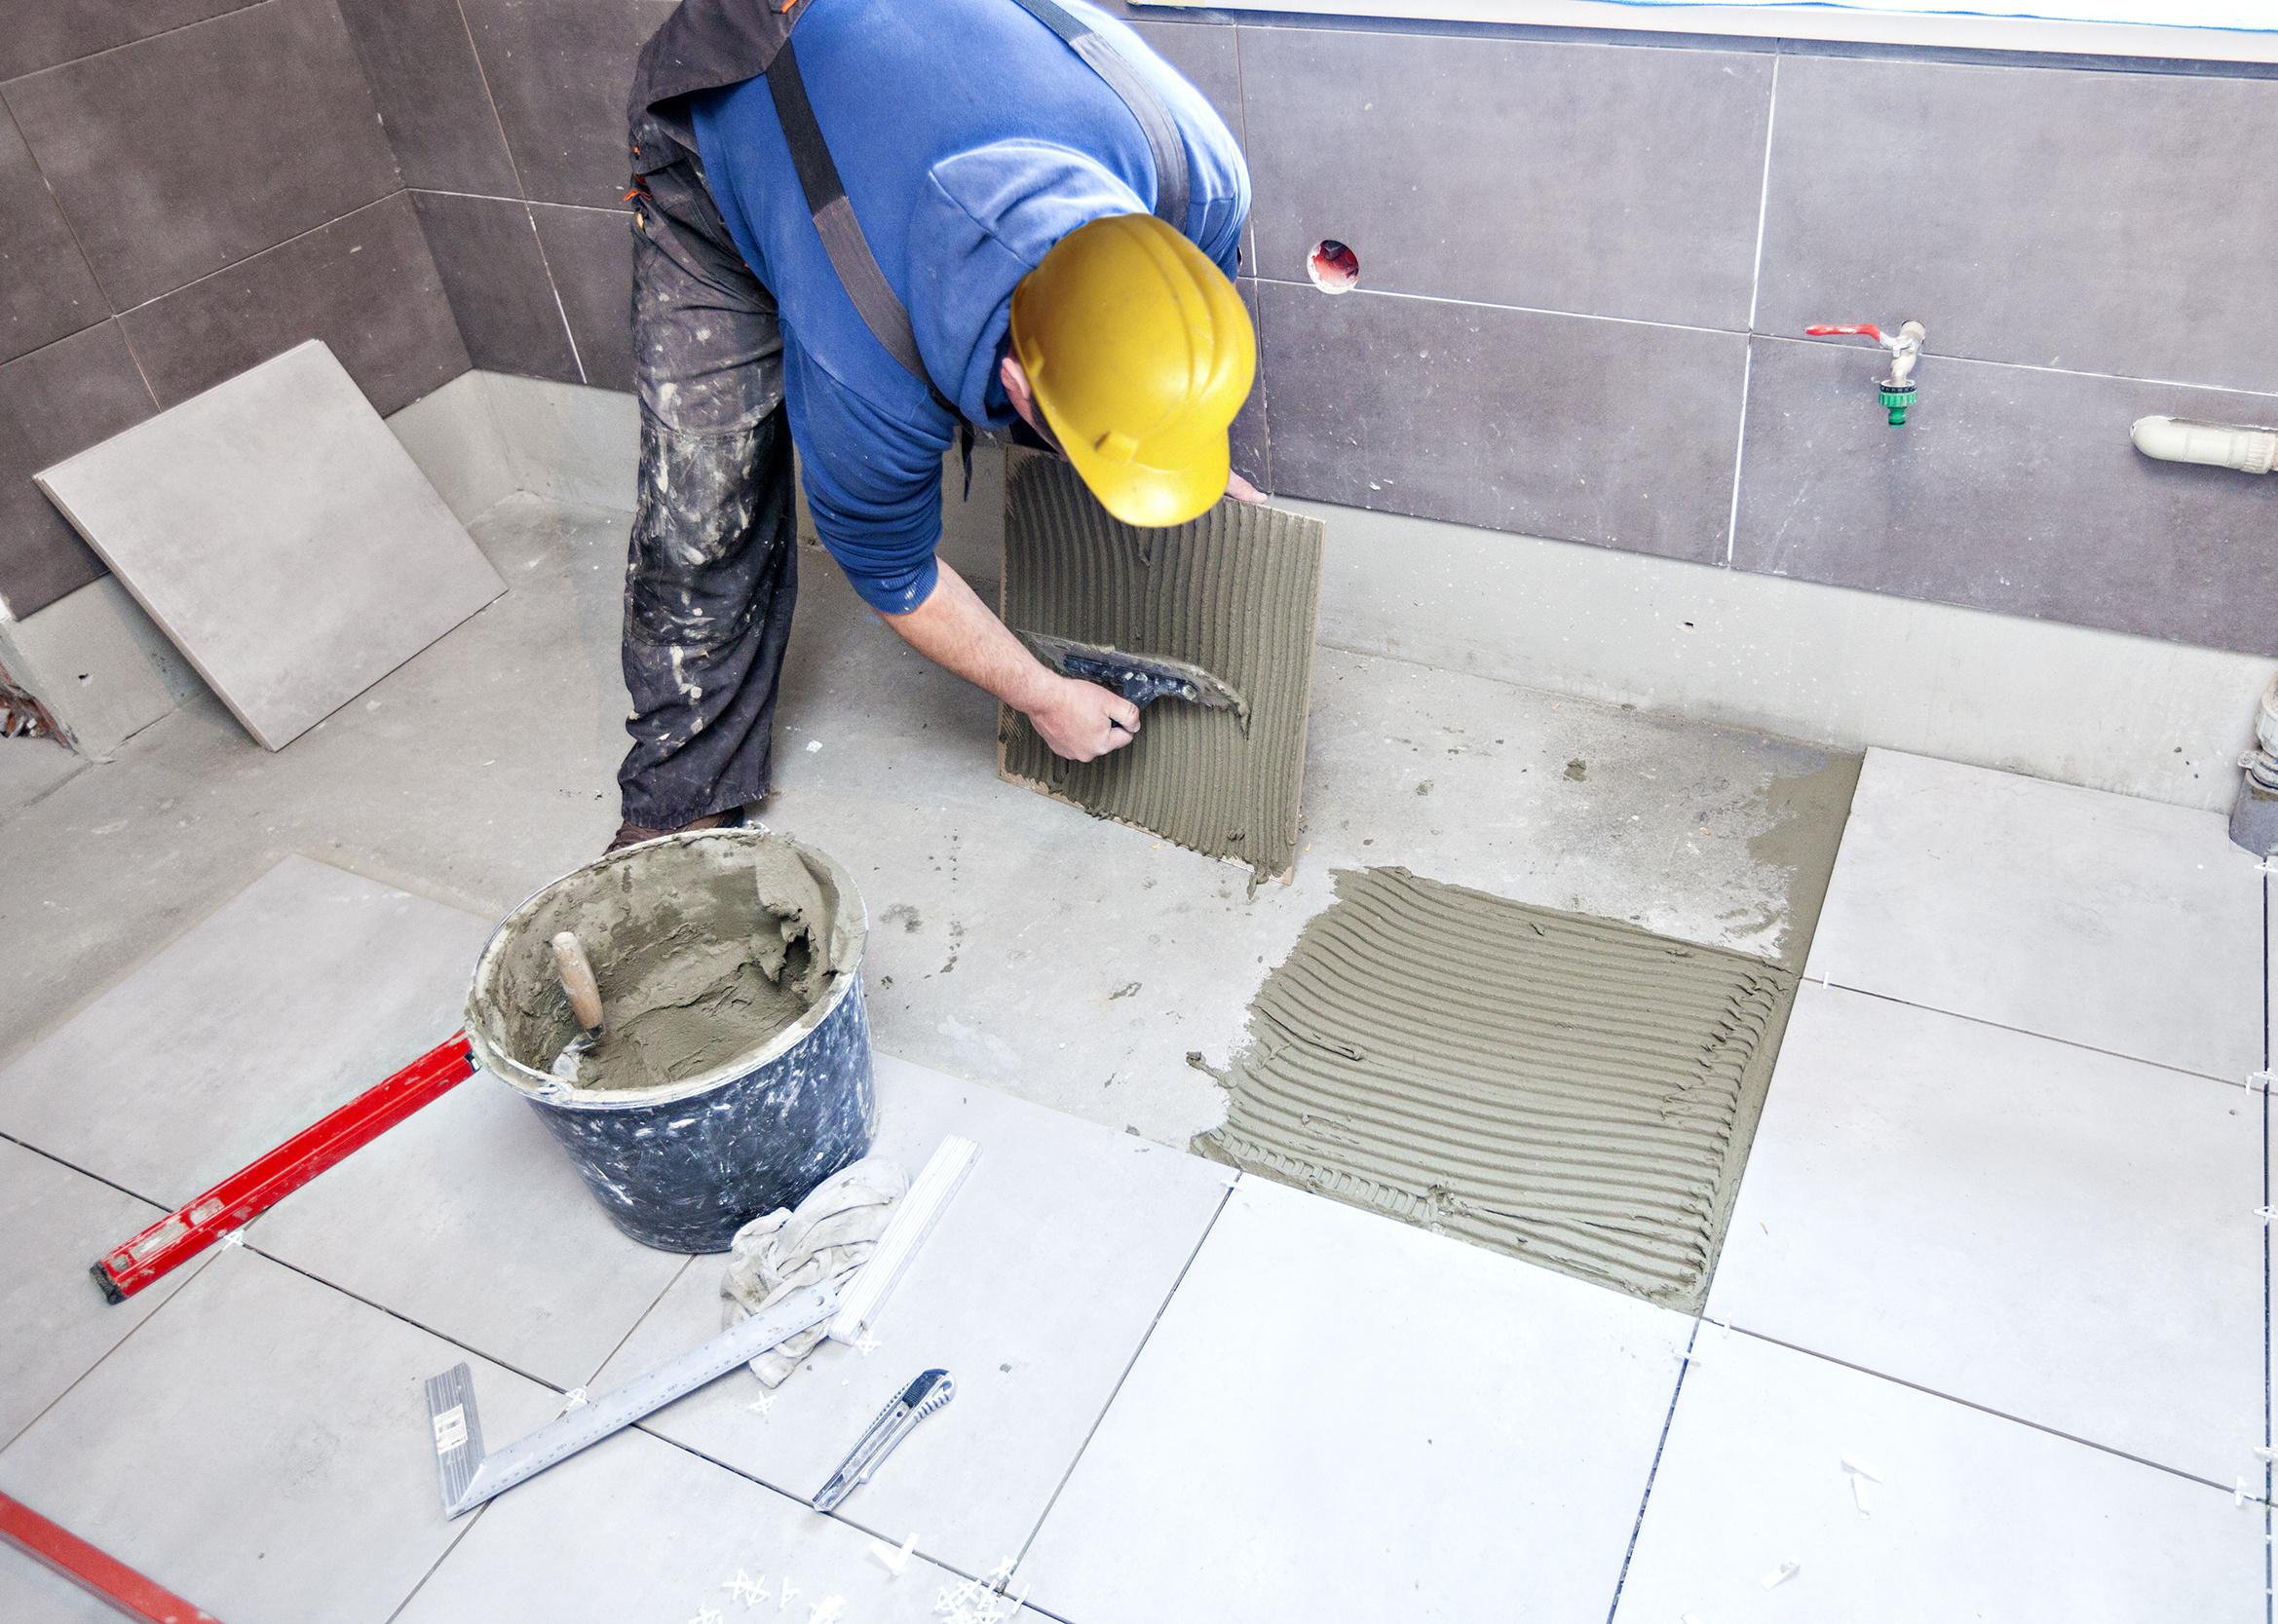 A tiler is replacing grout and bathroom tiles